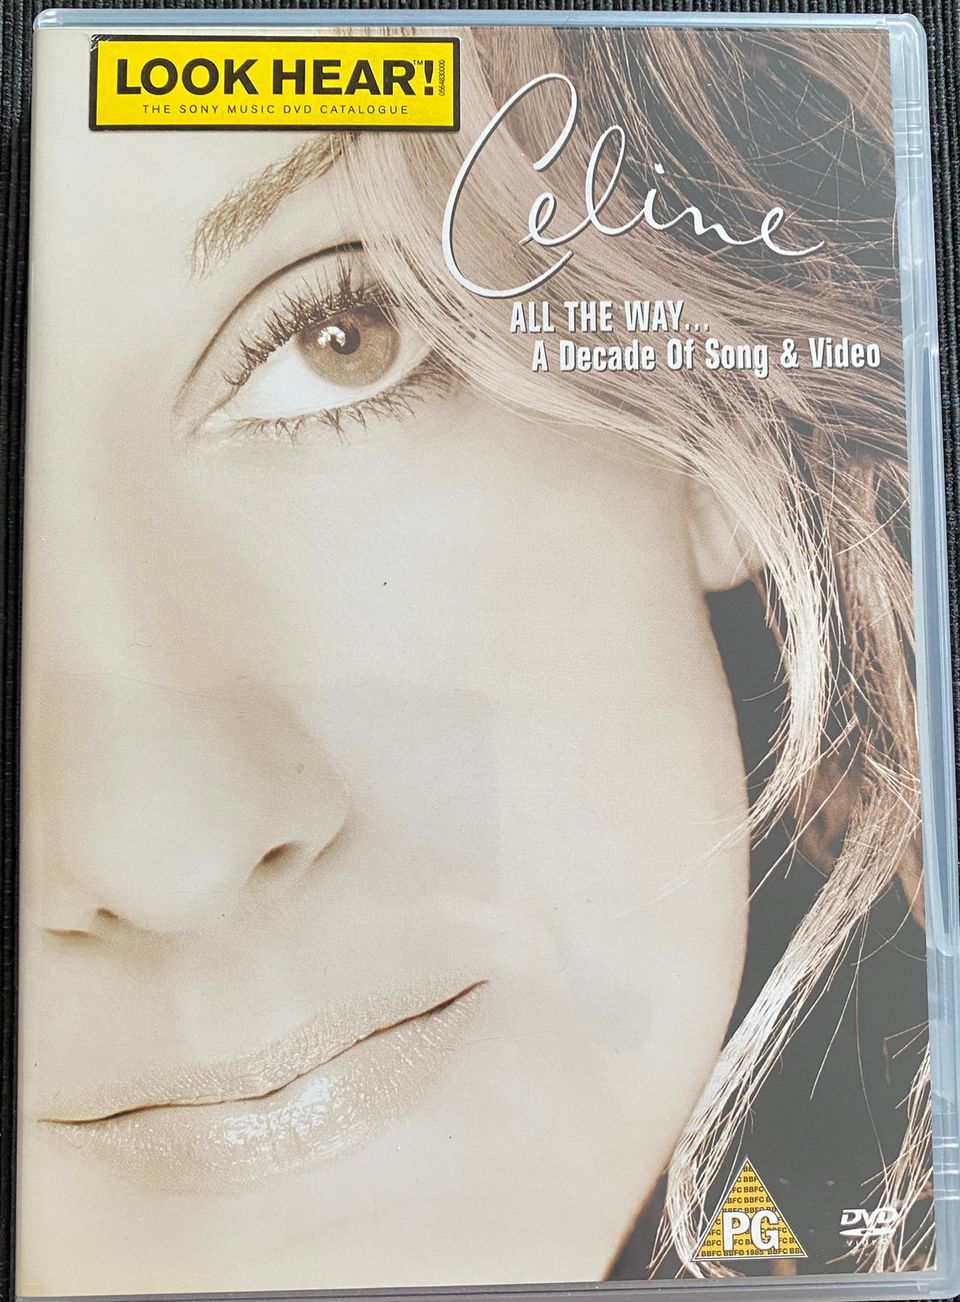 Celine  All the way… A decade of song & video